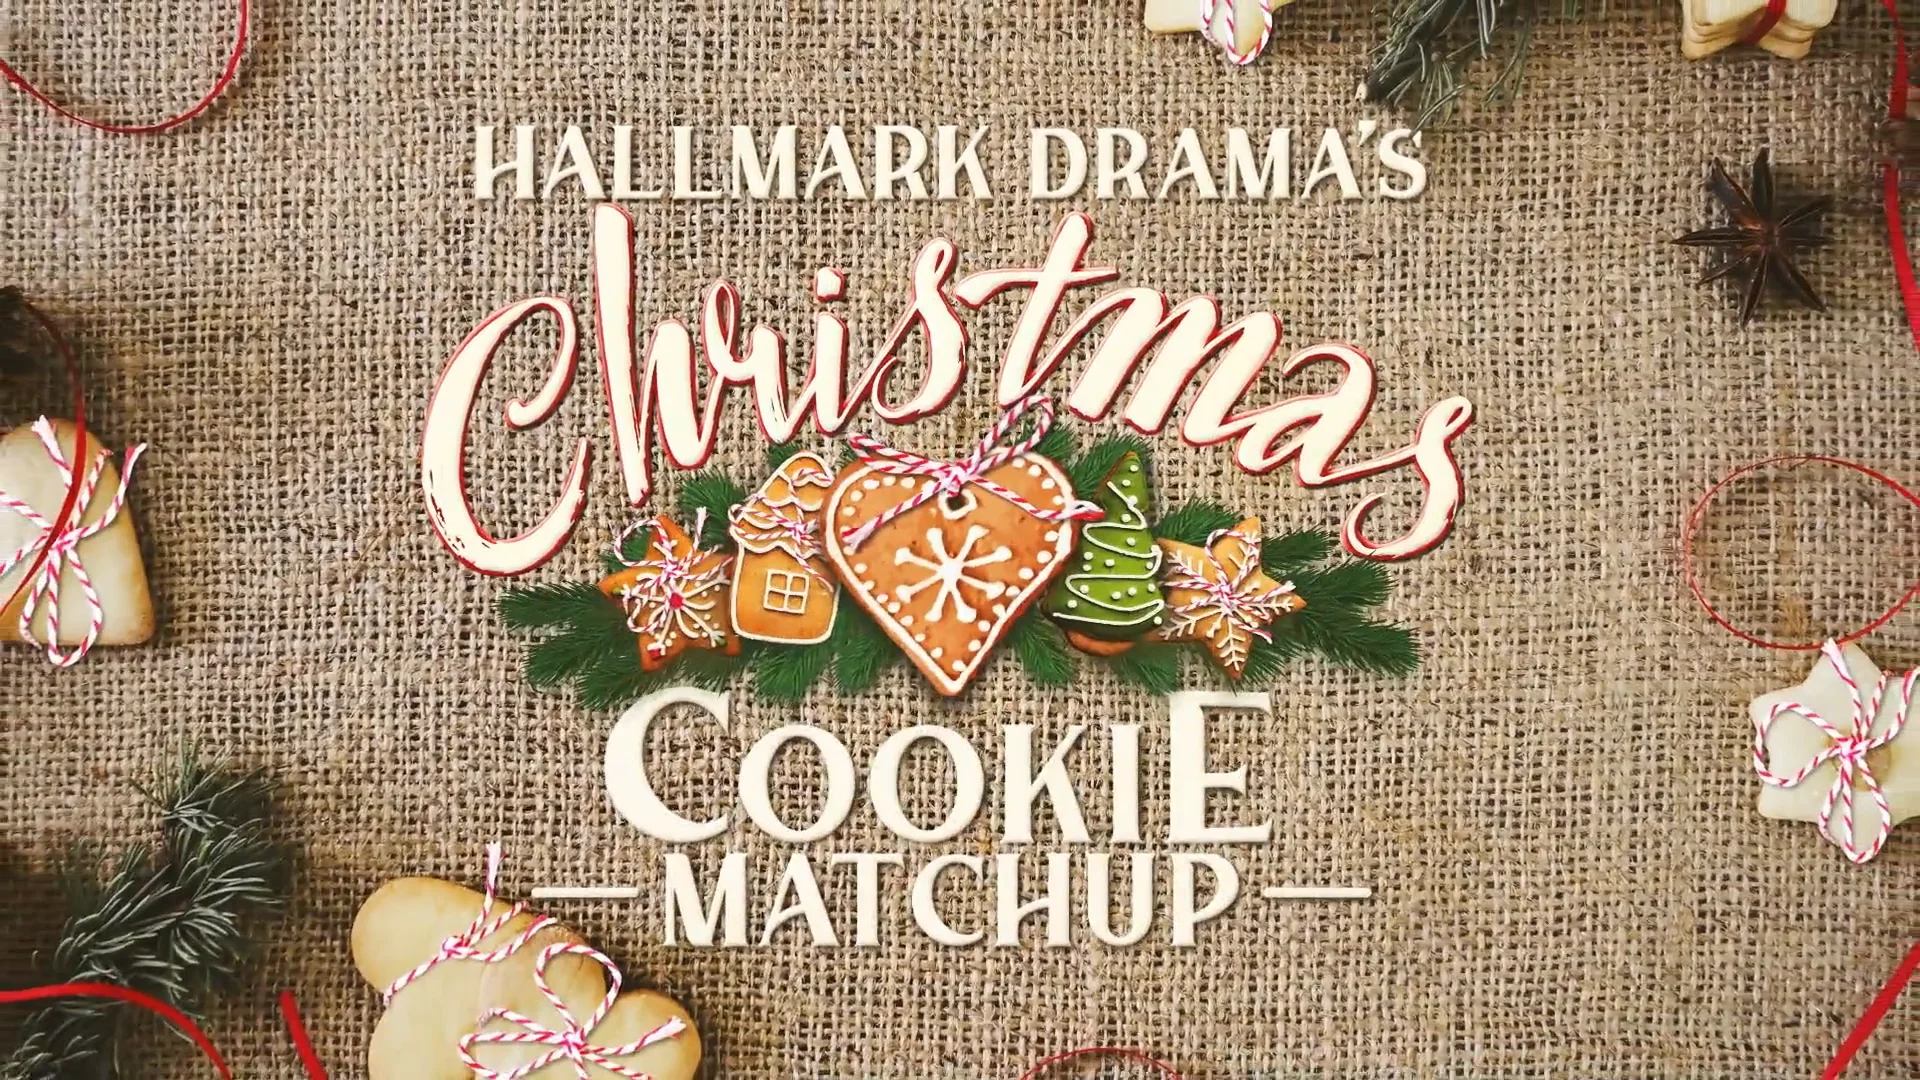 Hallmark Channel Bake and Watch Oven Mitt and Cookie Cutter, Set of 2